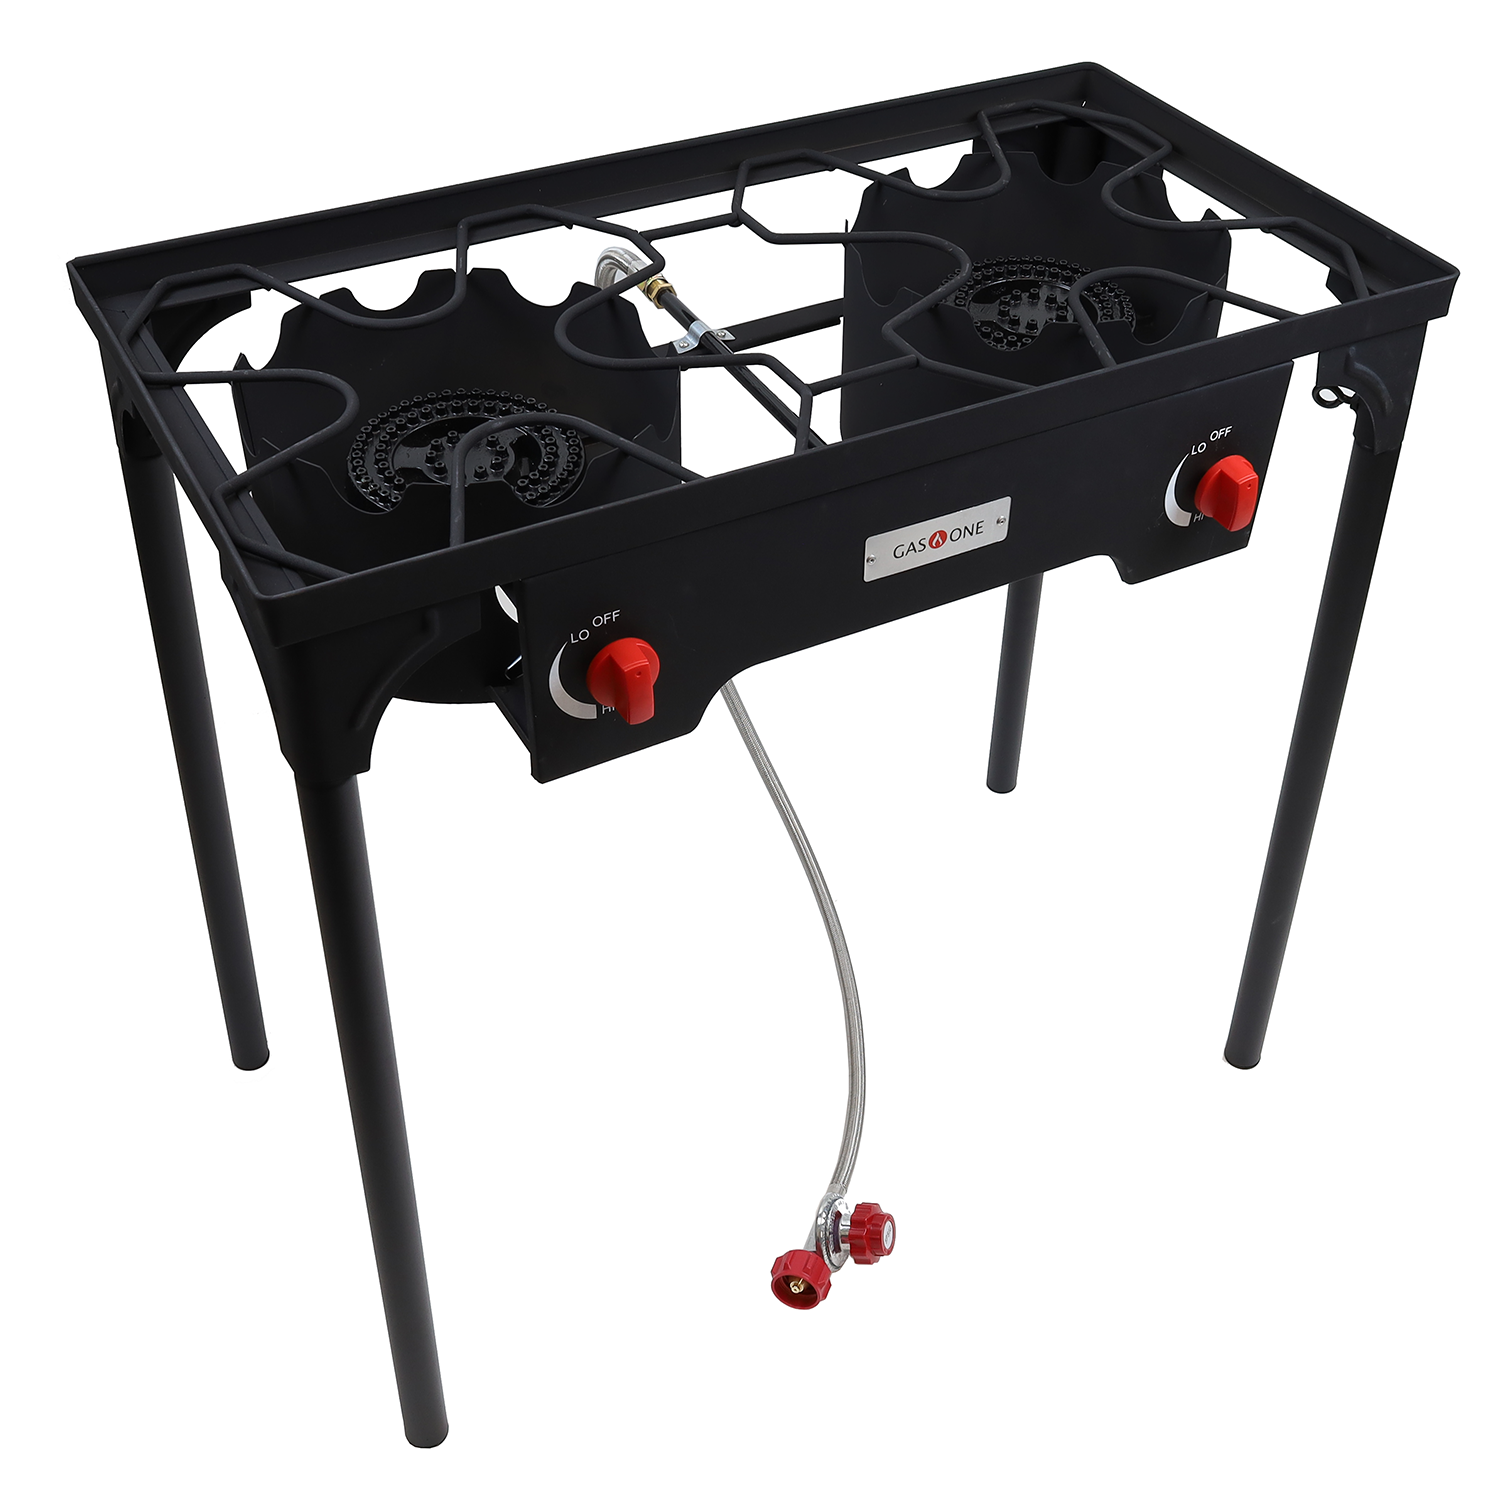 GAS One Two Burner Propane Camp Stove, Two 75,000BTU Cast Iron Burners with Windscreen Outdoor High Pressure Propane Double Burner